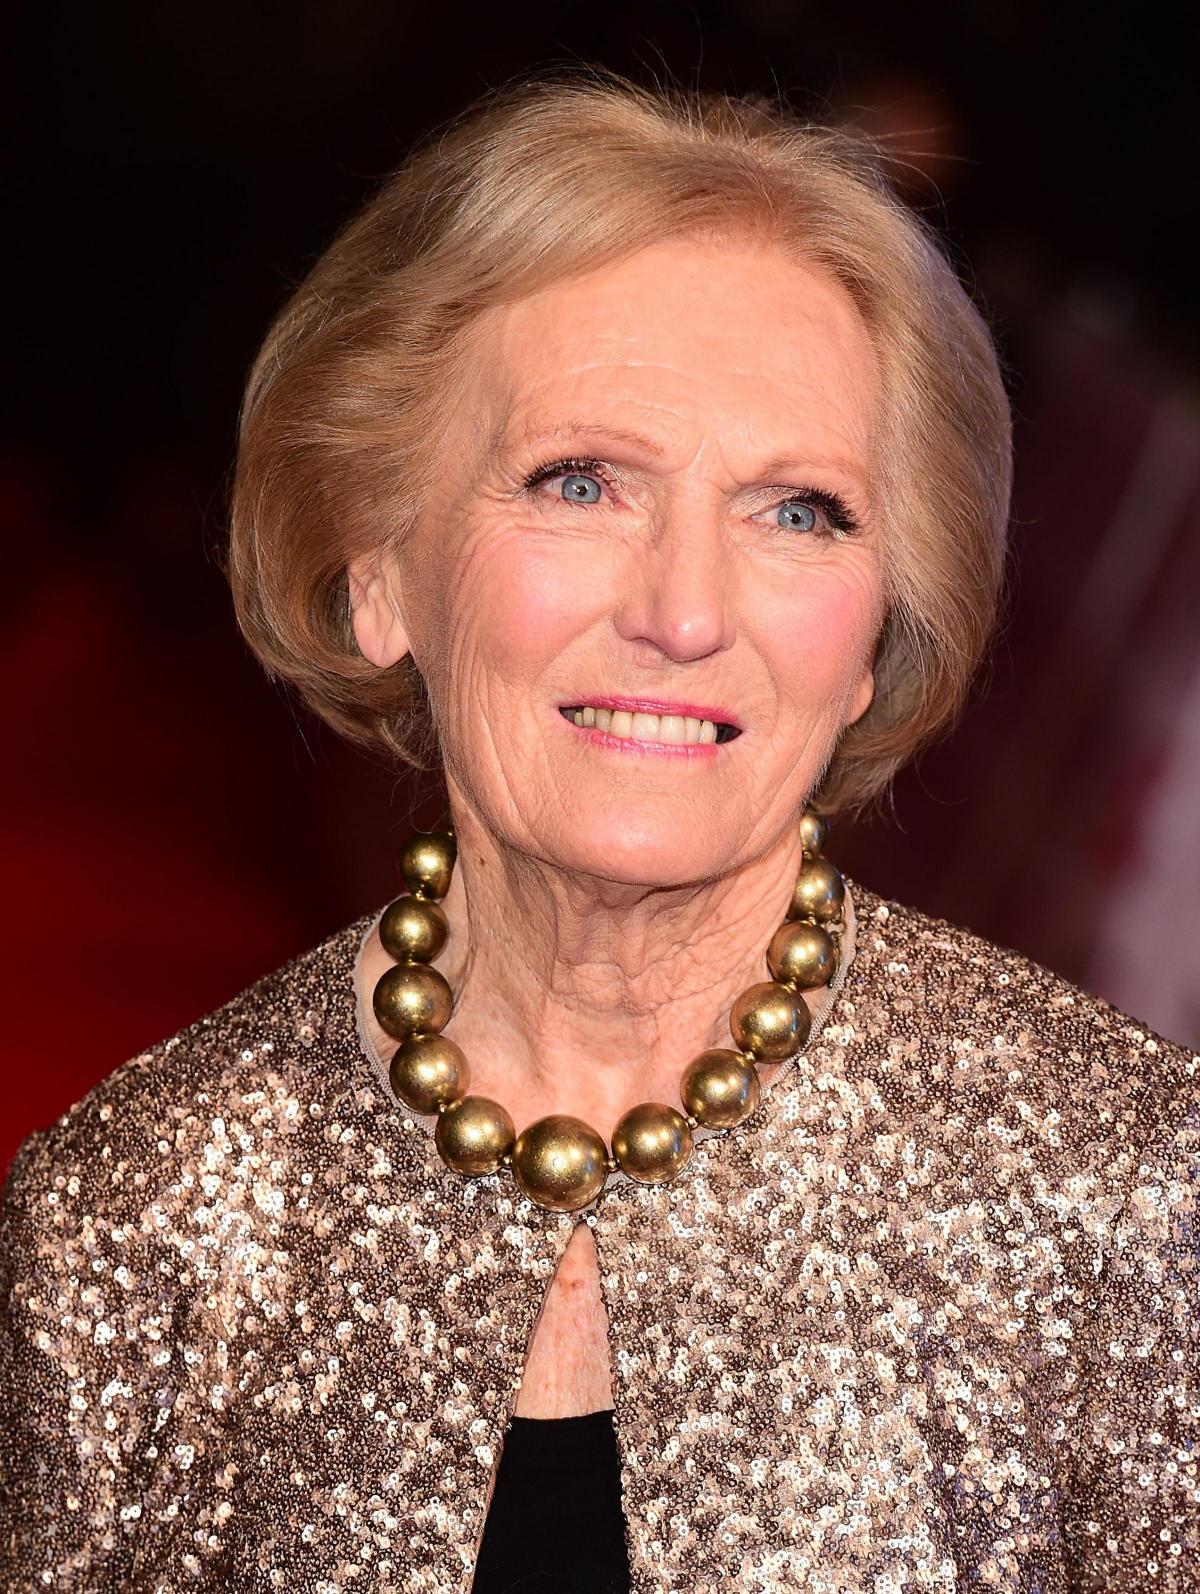 Food writer Mary Berry: "My domestic science teacher, Miss Date, encouraged me and when I took home my cooking, my parents and my brothers would say "Oh that's a bit of alright, why don't you make another one" which was very encouraging."